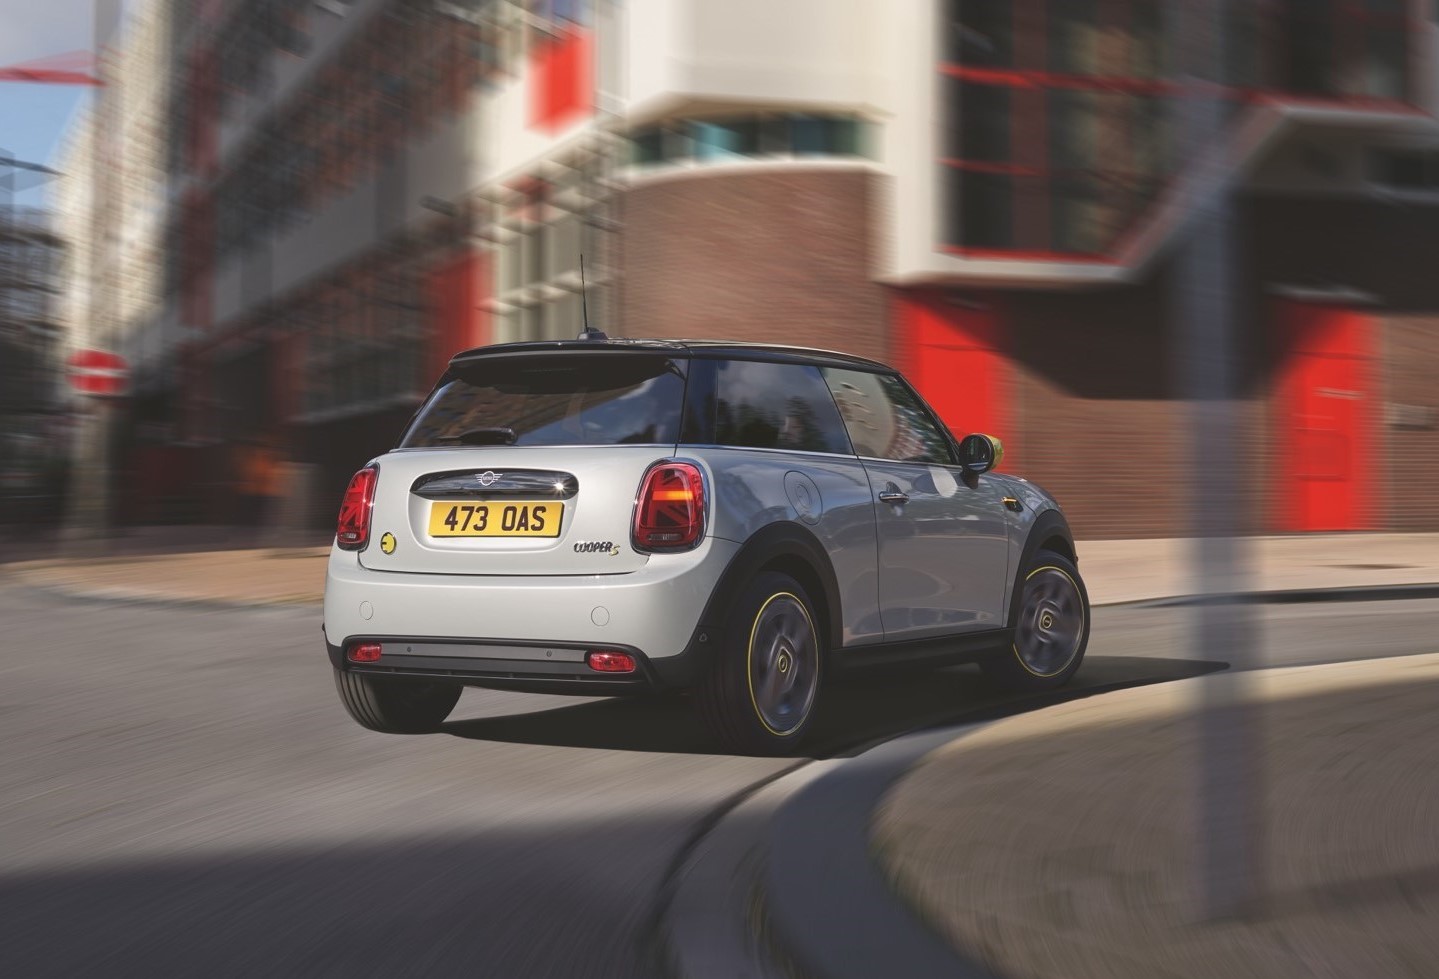 MINI Electric makes your money go further.